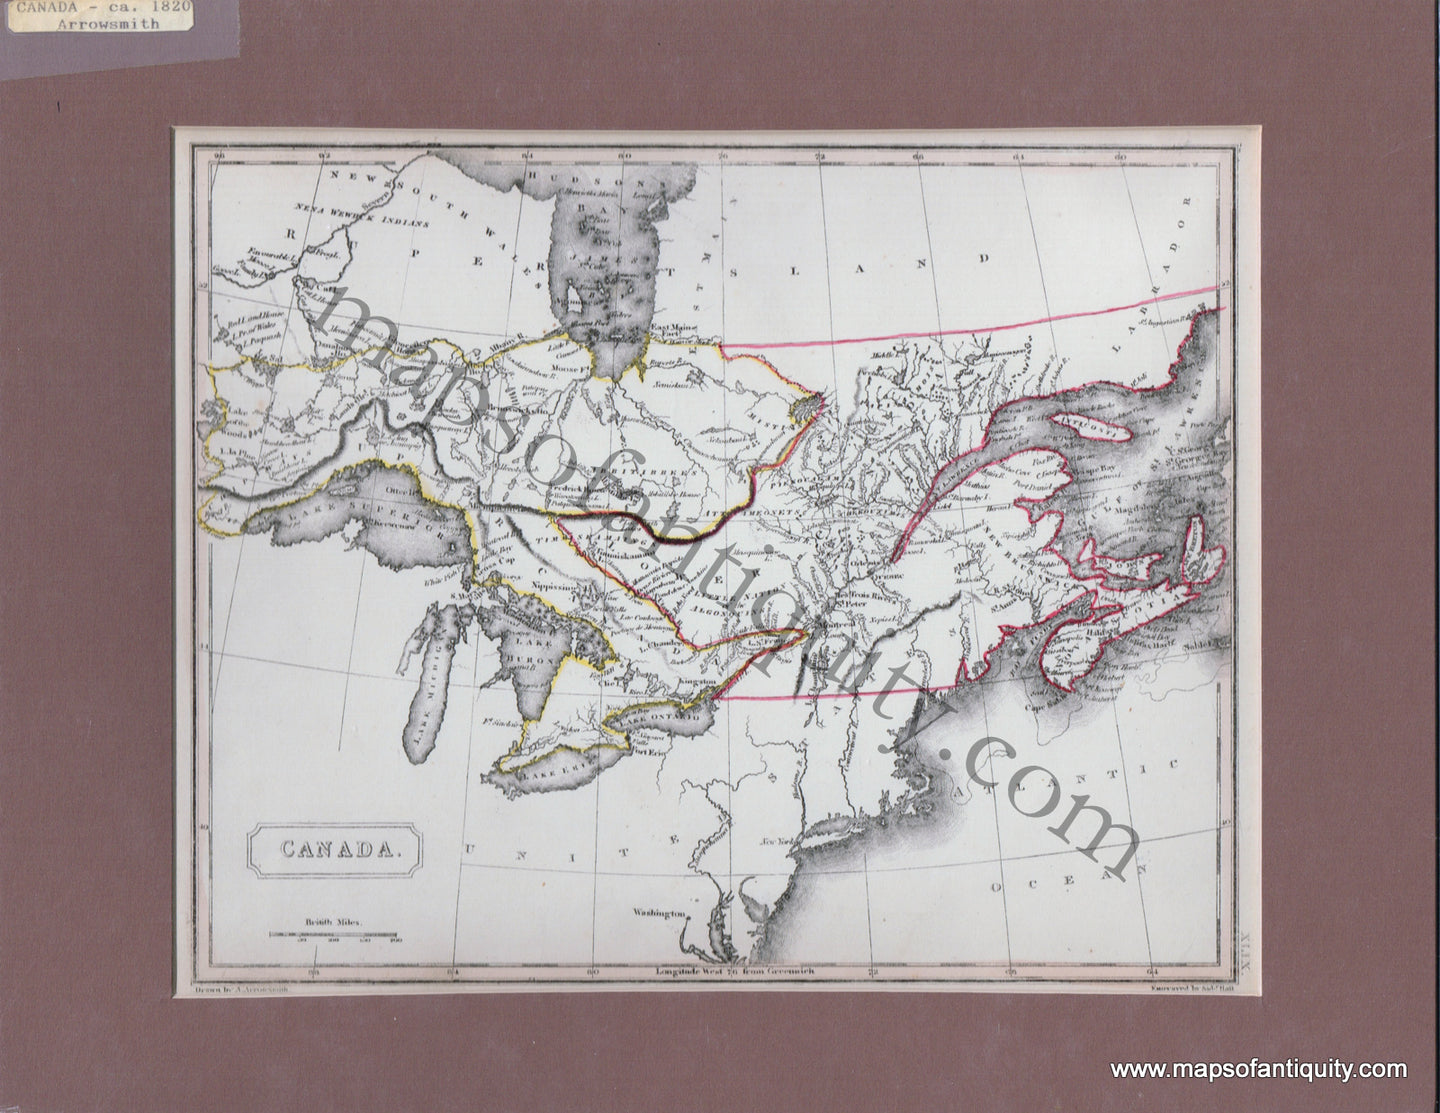 Antique-Hand-Colored-Map-Canada-North-America-Canada-c.-1820-Arrowsmith-Maps-Of-Antiquity